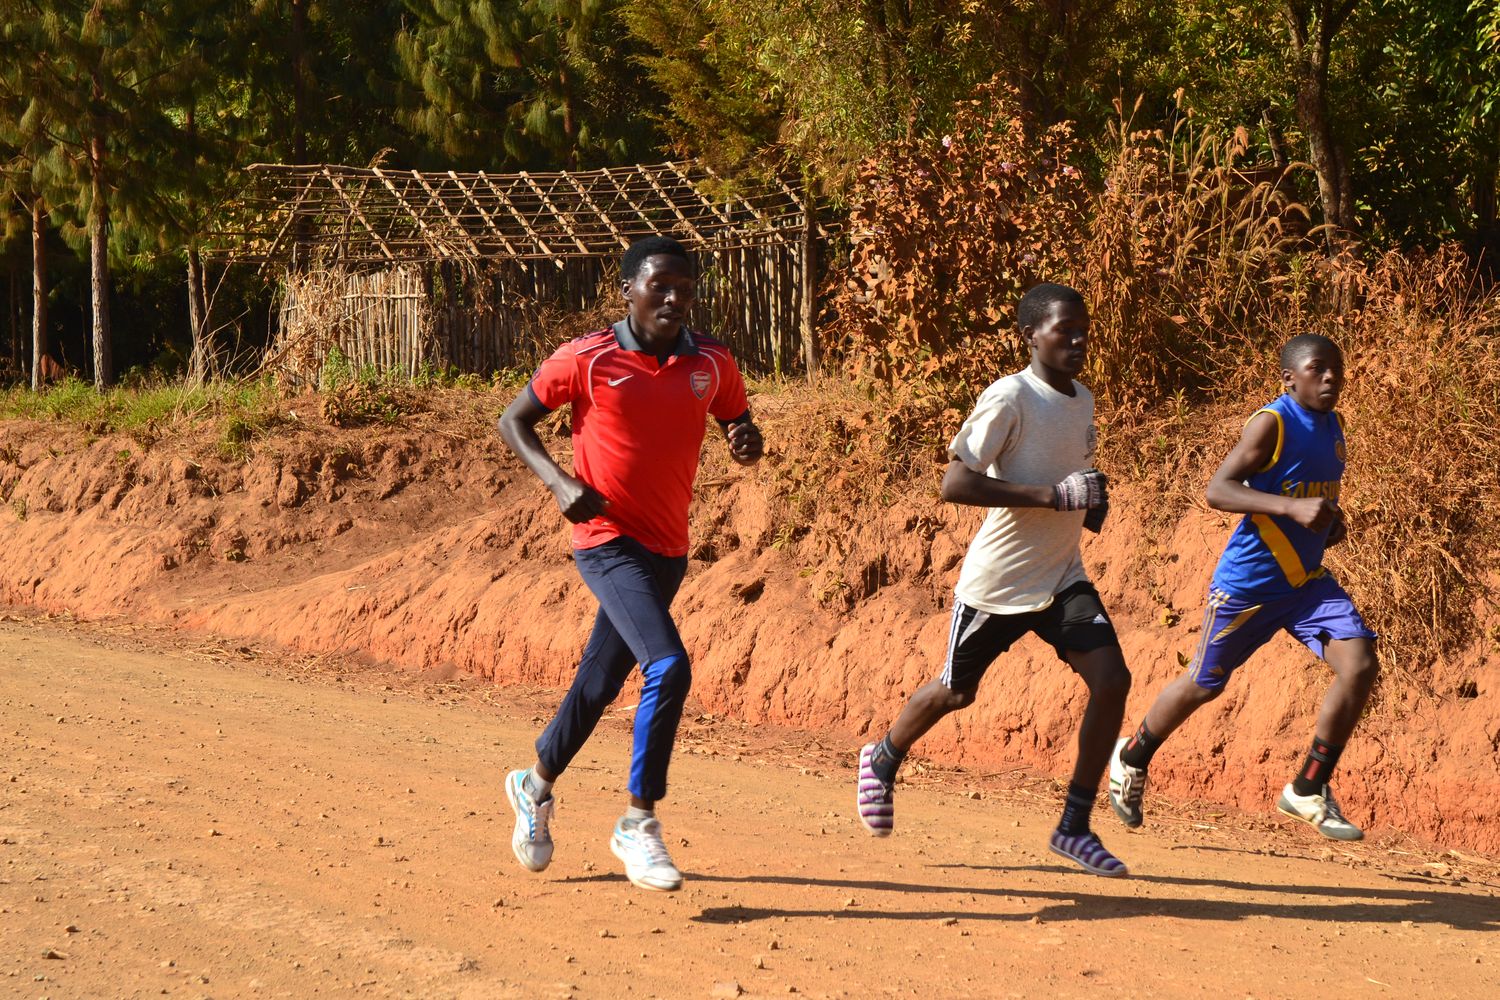 Running competitors on the road between Mdilidili and Lugarawa